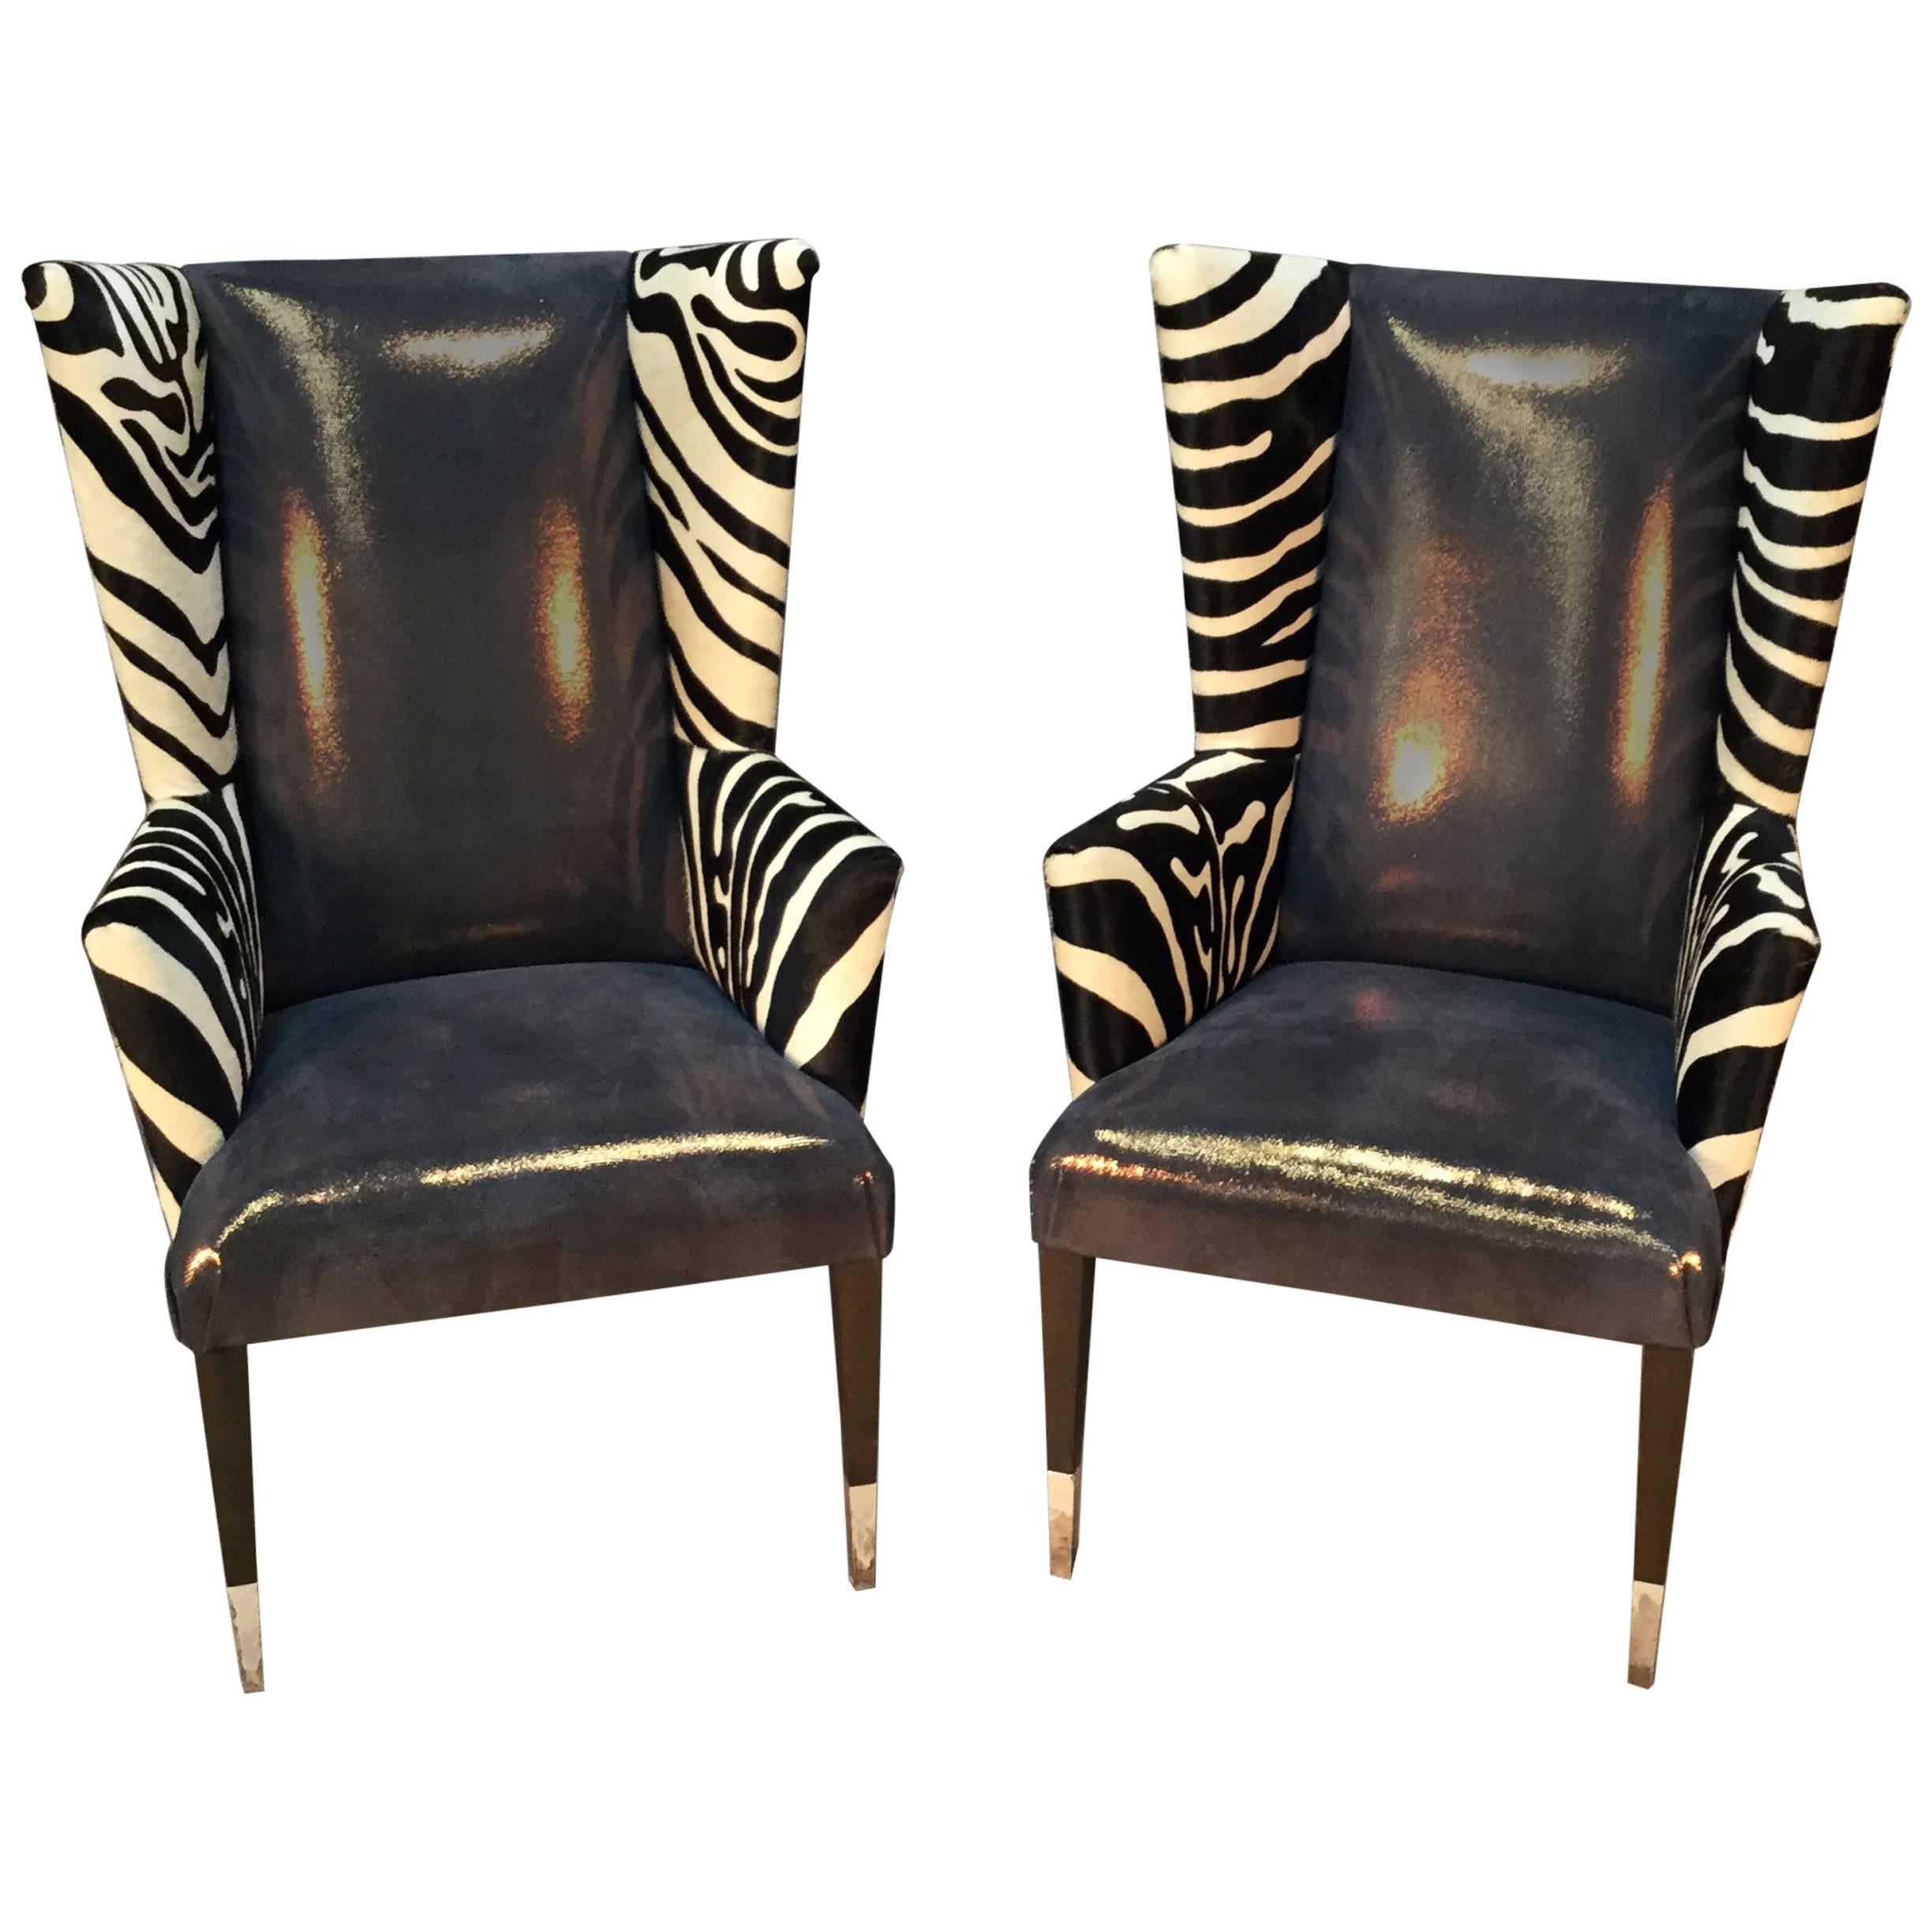 Pair of Modern Wingback Chairs in Zebra Printed Cowhide and Faux Shagreen